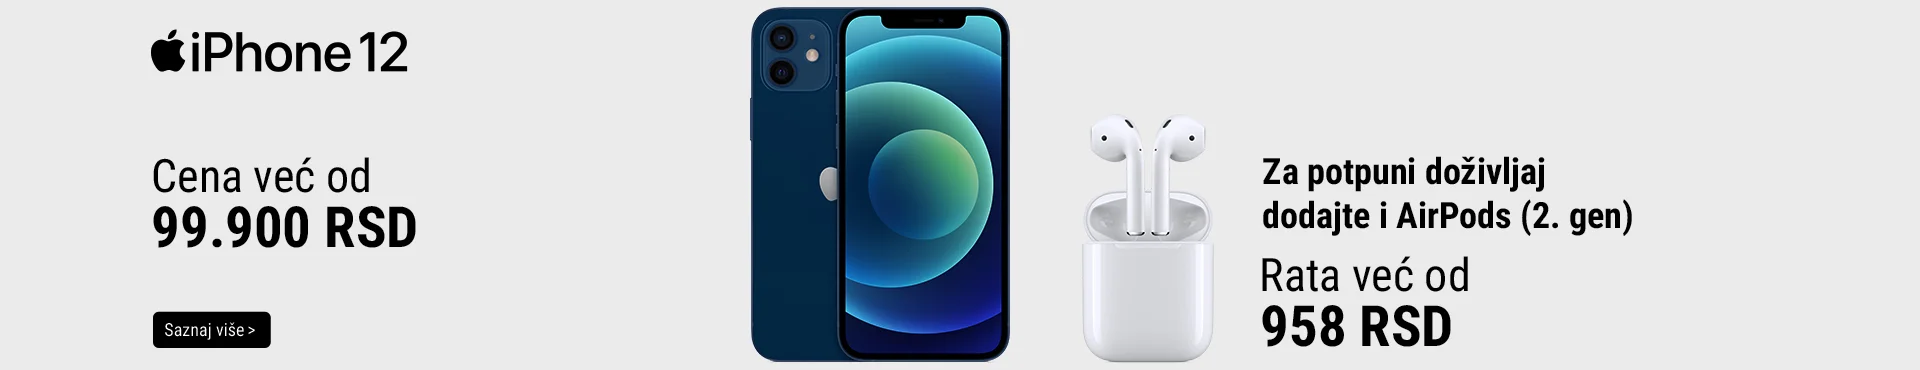 iPhone 12+Airpods 2